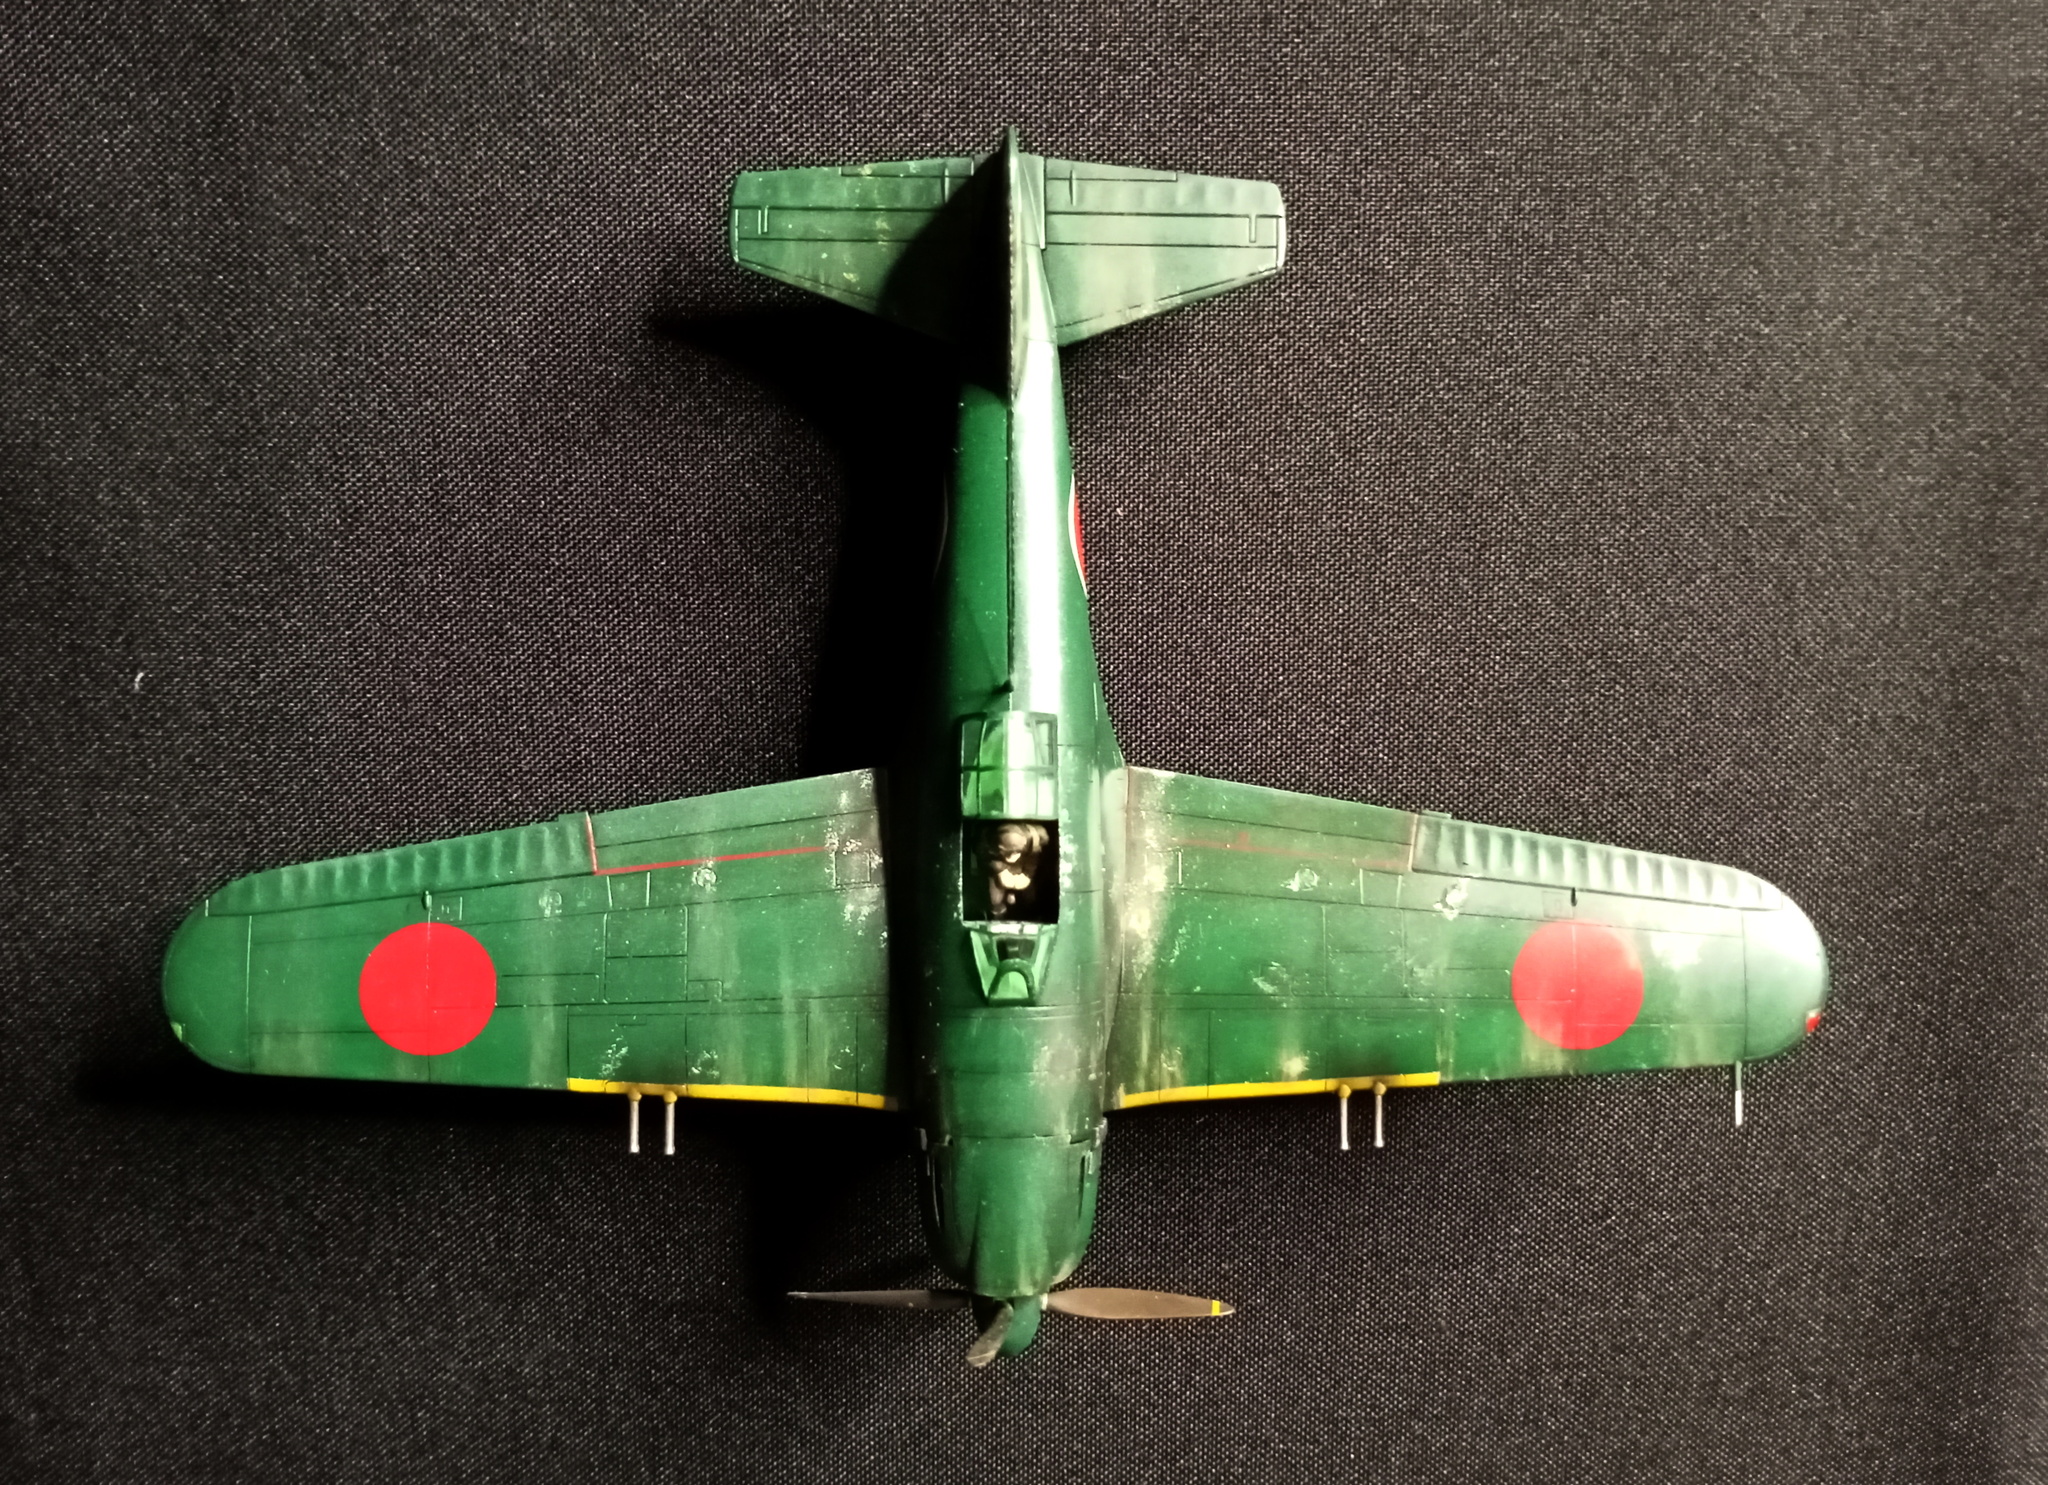 Hydroplane without floats. - My, Modeling, Stand modeling, Prefabricated model, Aircraft modeling, Hobby, Miniature, With your own hands, Needlework without process, , Aviation, Story, Airplane, The Second World War, Japan, Fighter, Video, Longpost